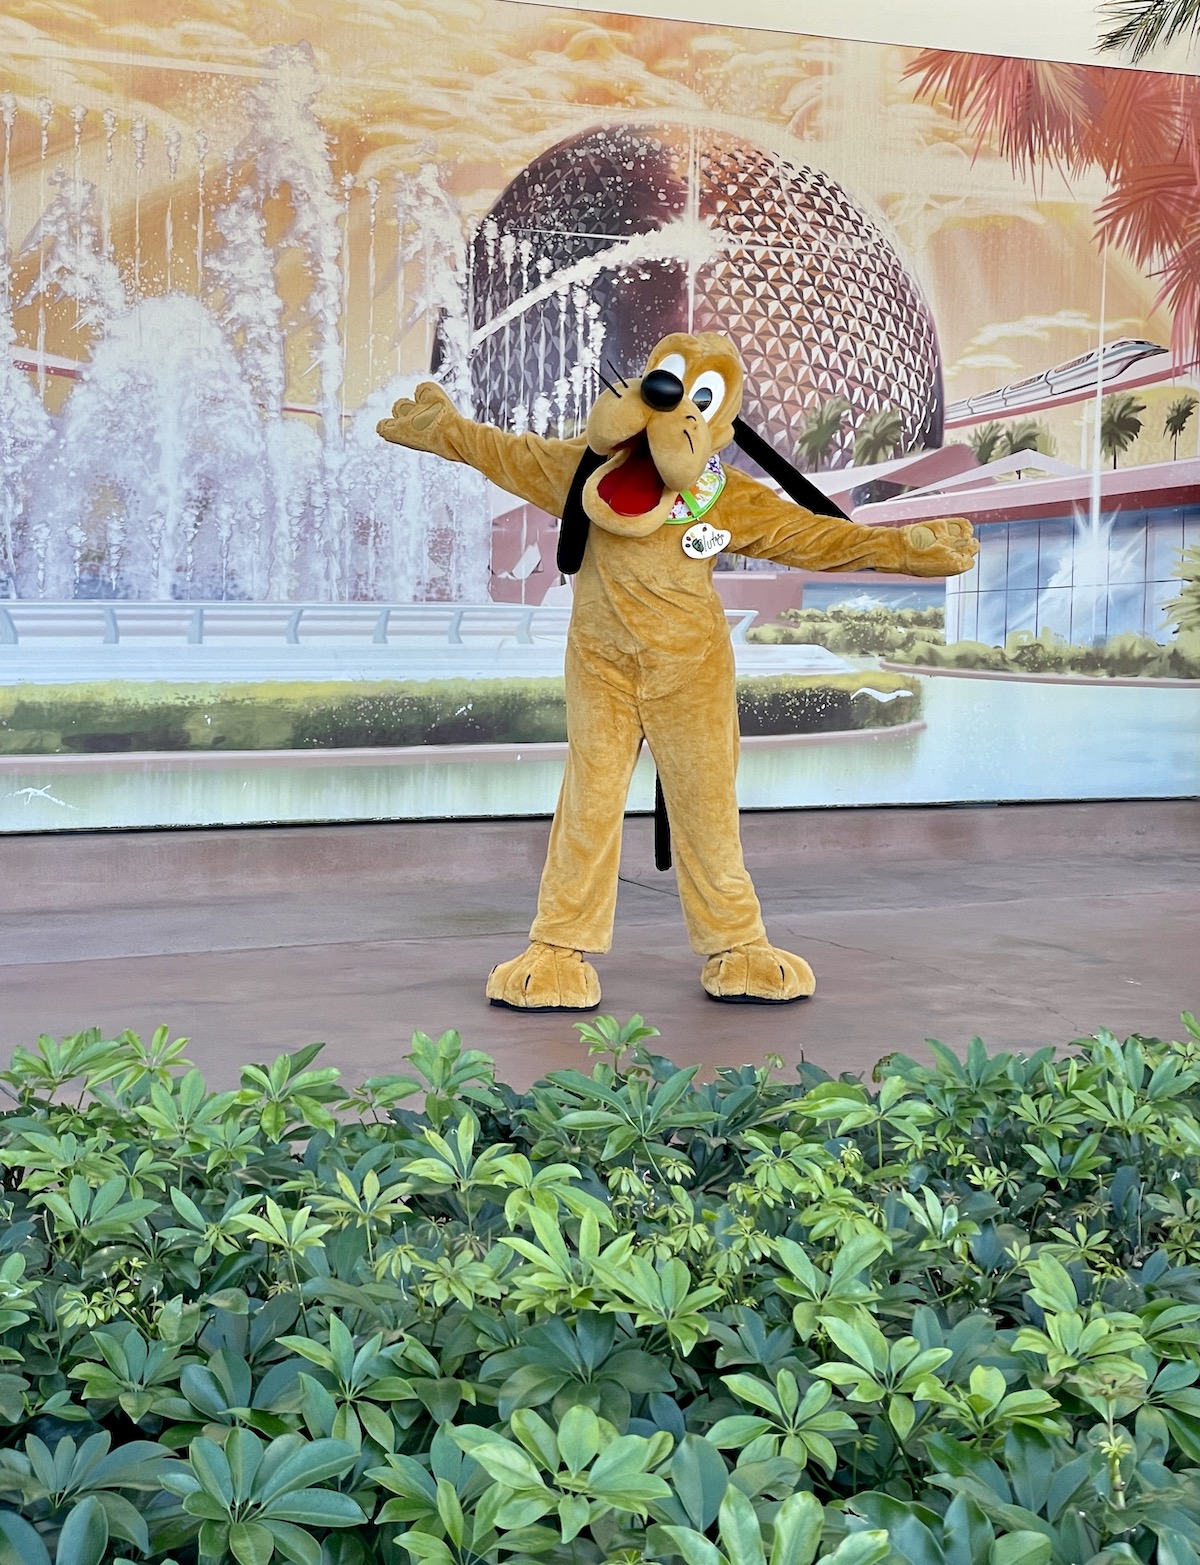 Pluto at Epcot Festival of the Arts 2022.